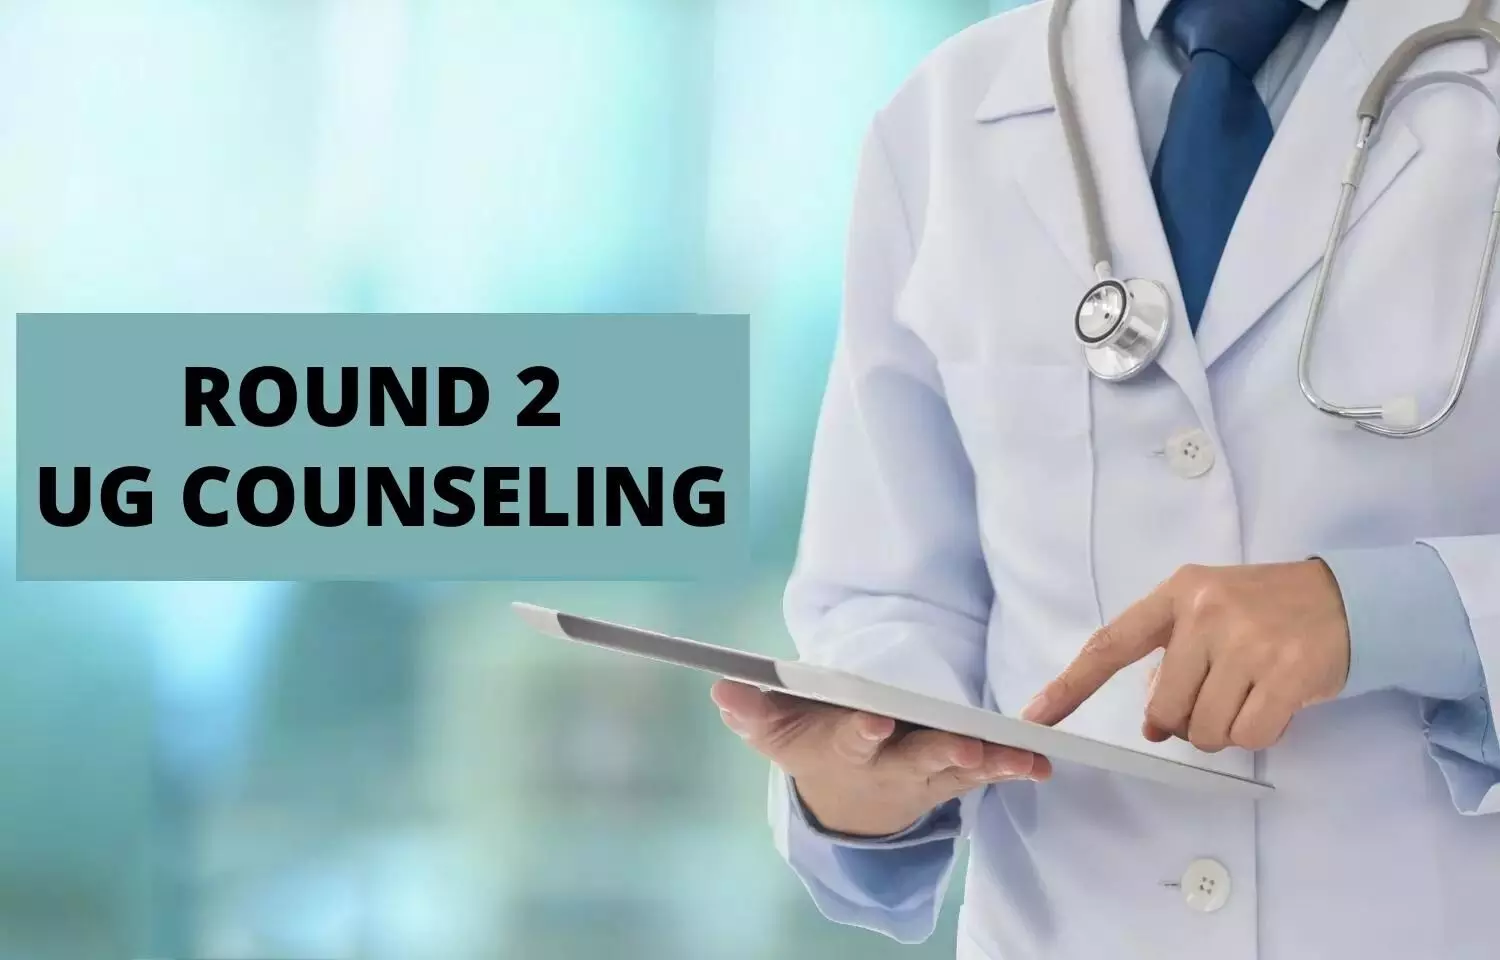 MCC adds MBBS seats from Lakhimpur Medical College to Round 2 NEET Counselling, Details